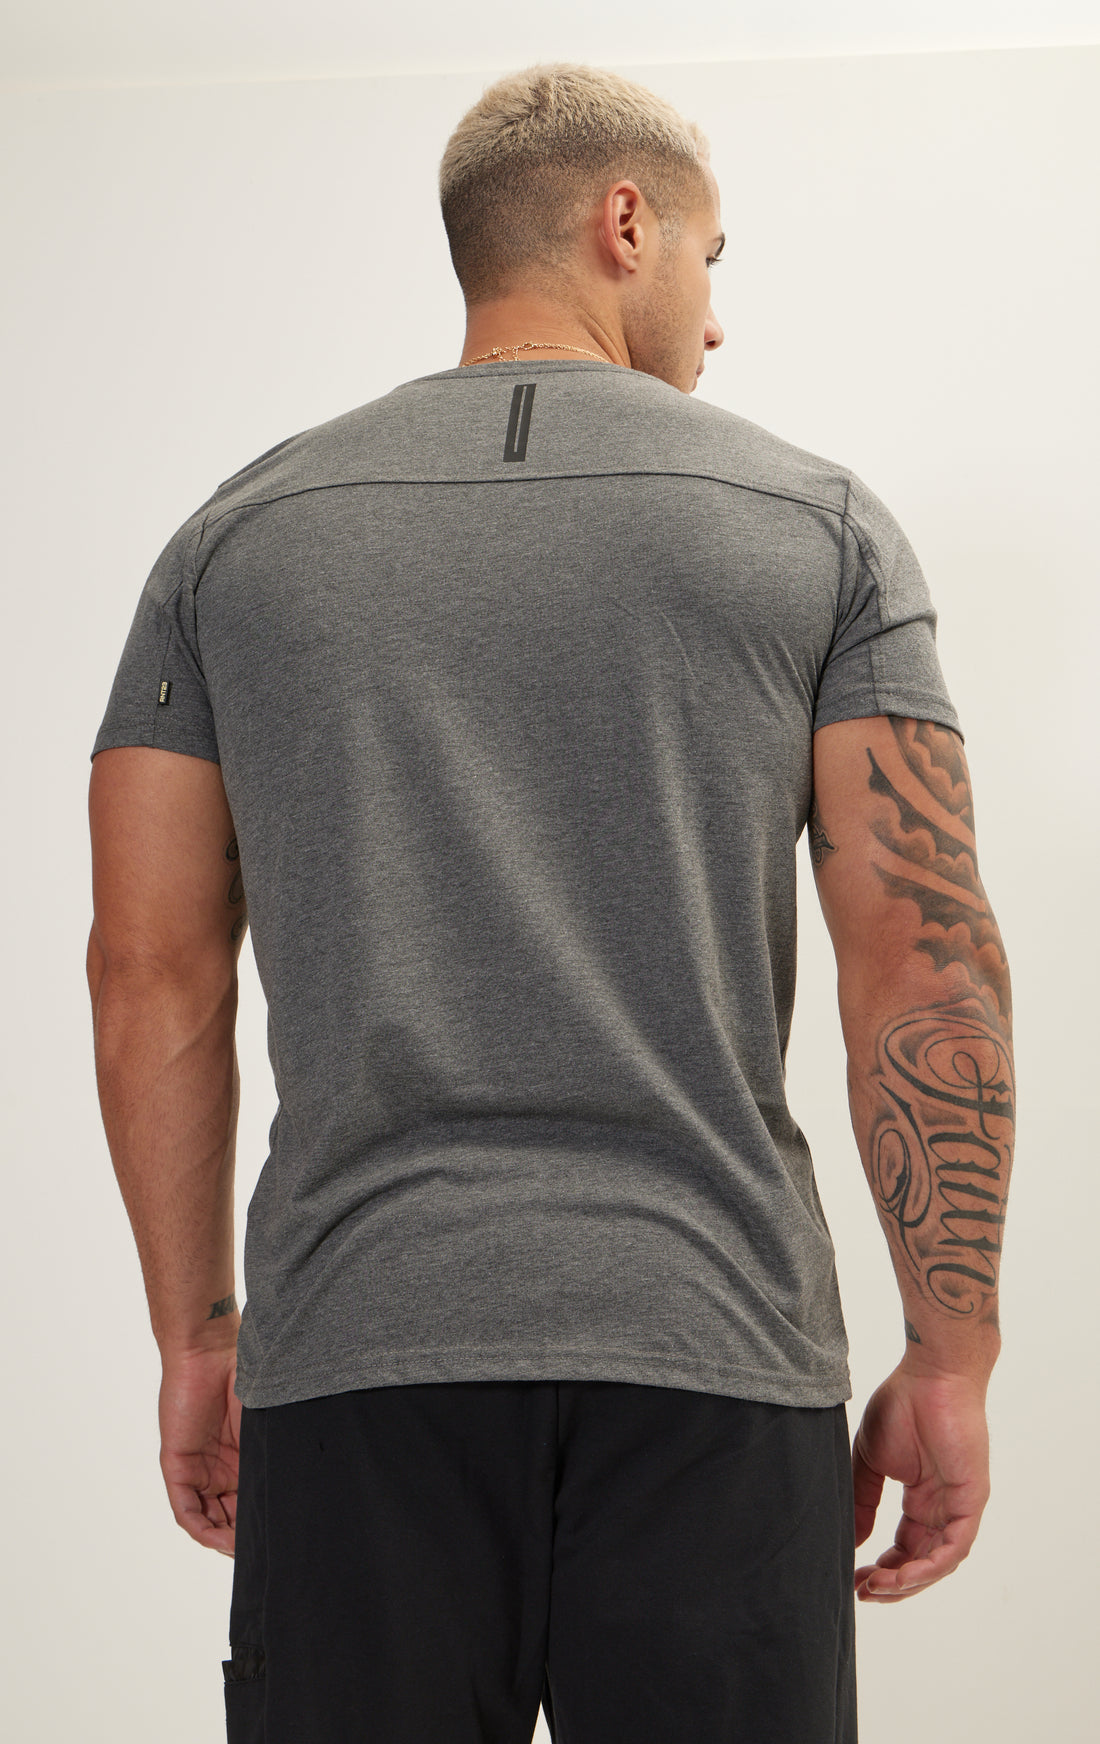 N° 8171 T-SHIRT ANTHRACITE